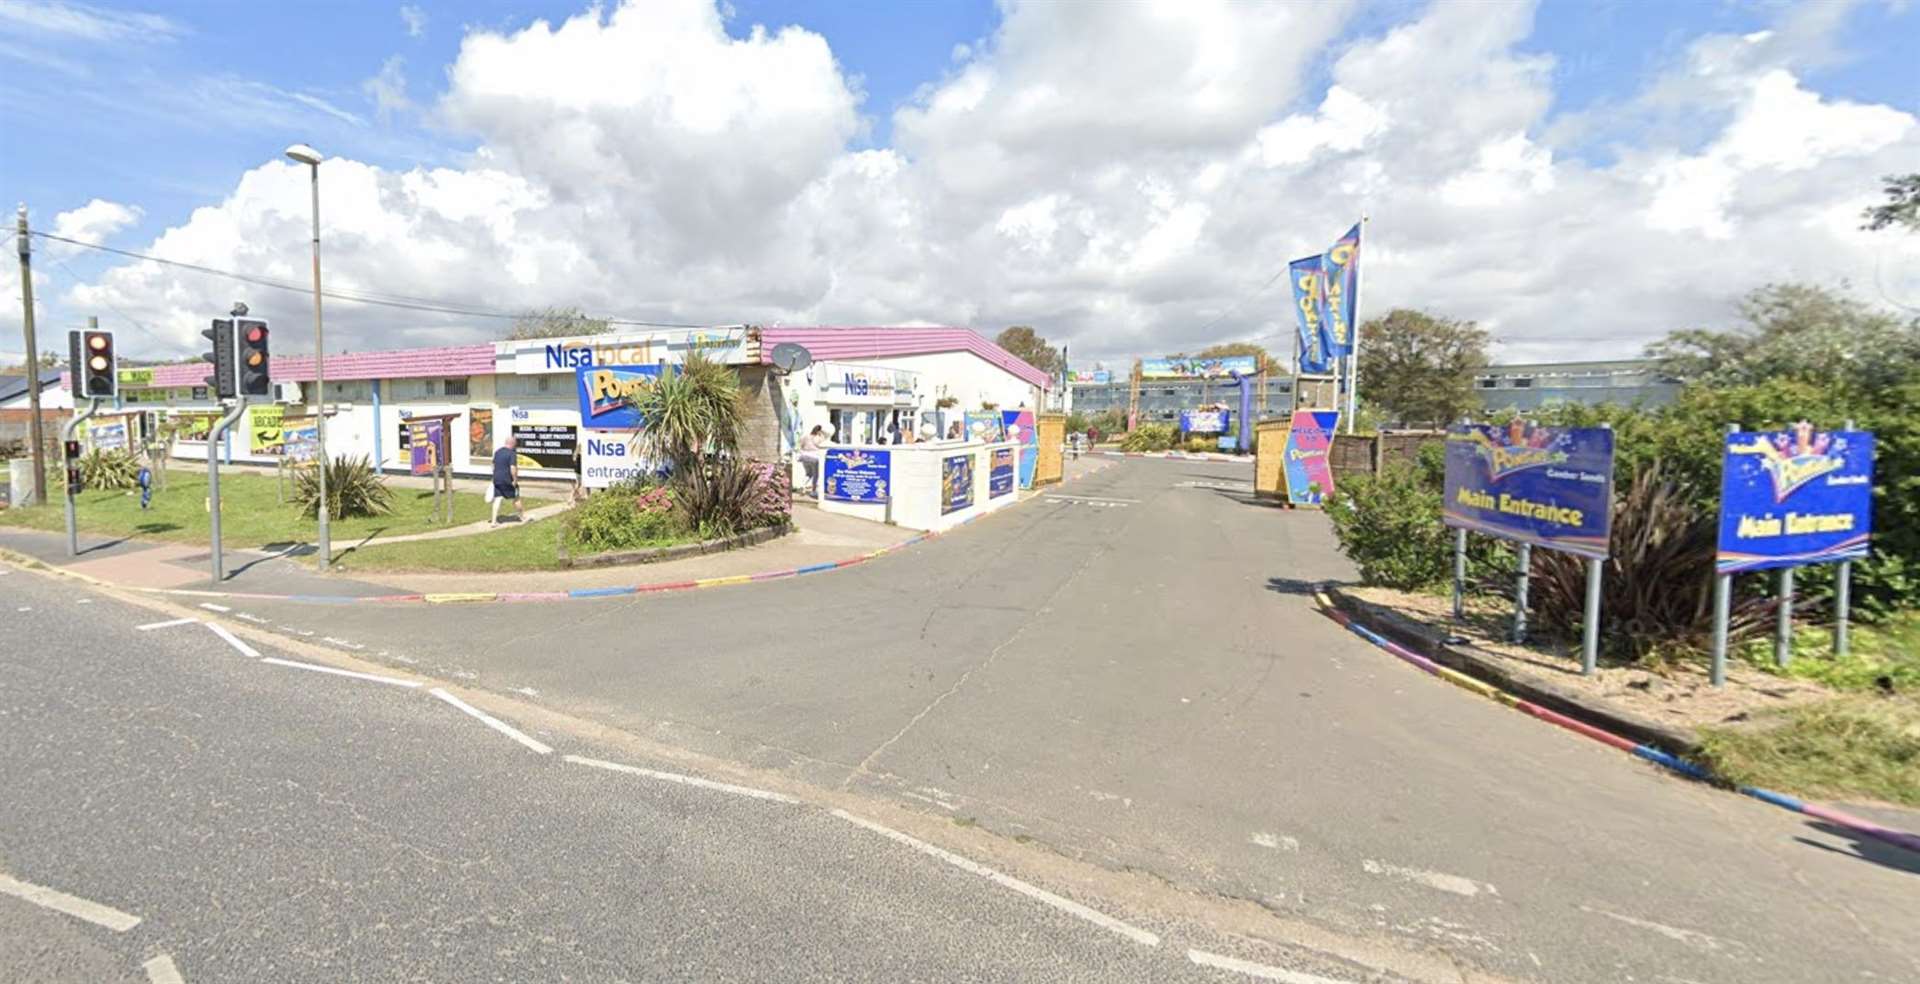 Pontins in Camber Sands. Picture: Google Street View